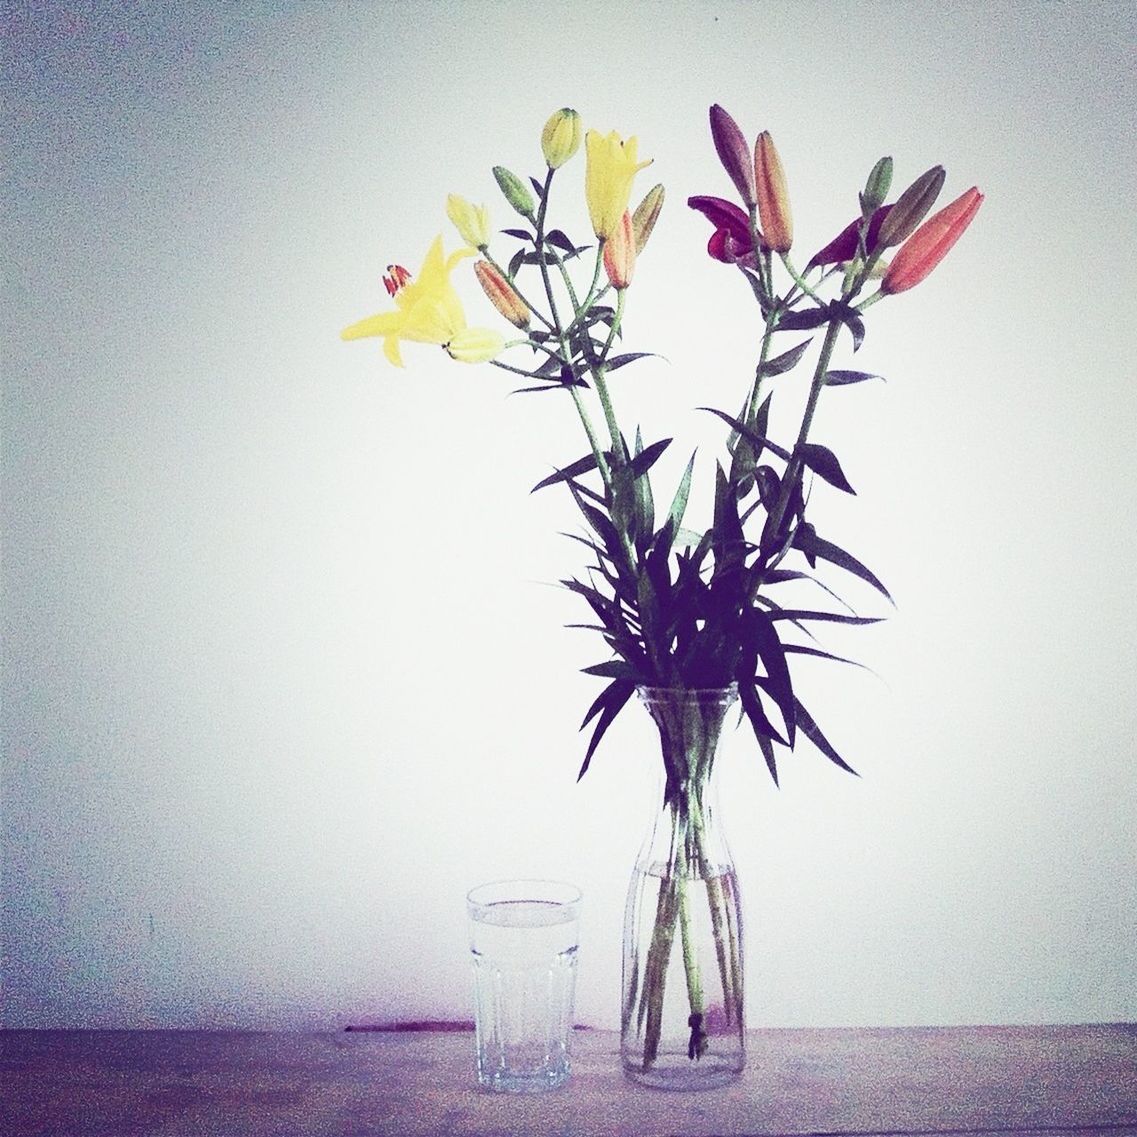 Water glass and flower vase on table